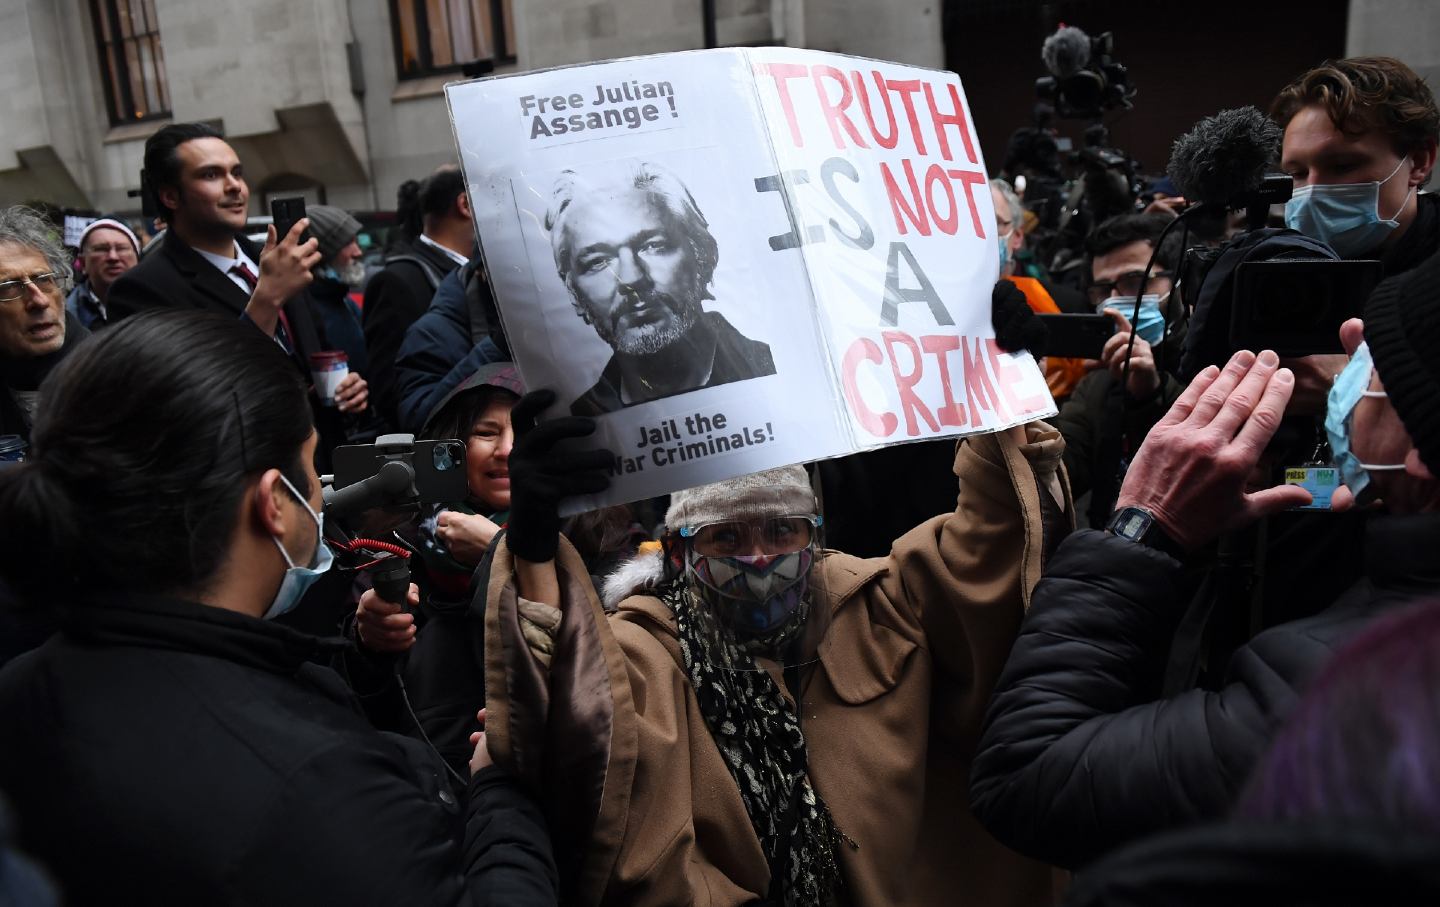 Julian Assange supporters celebrate outside, one holding a sign that says 